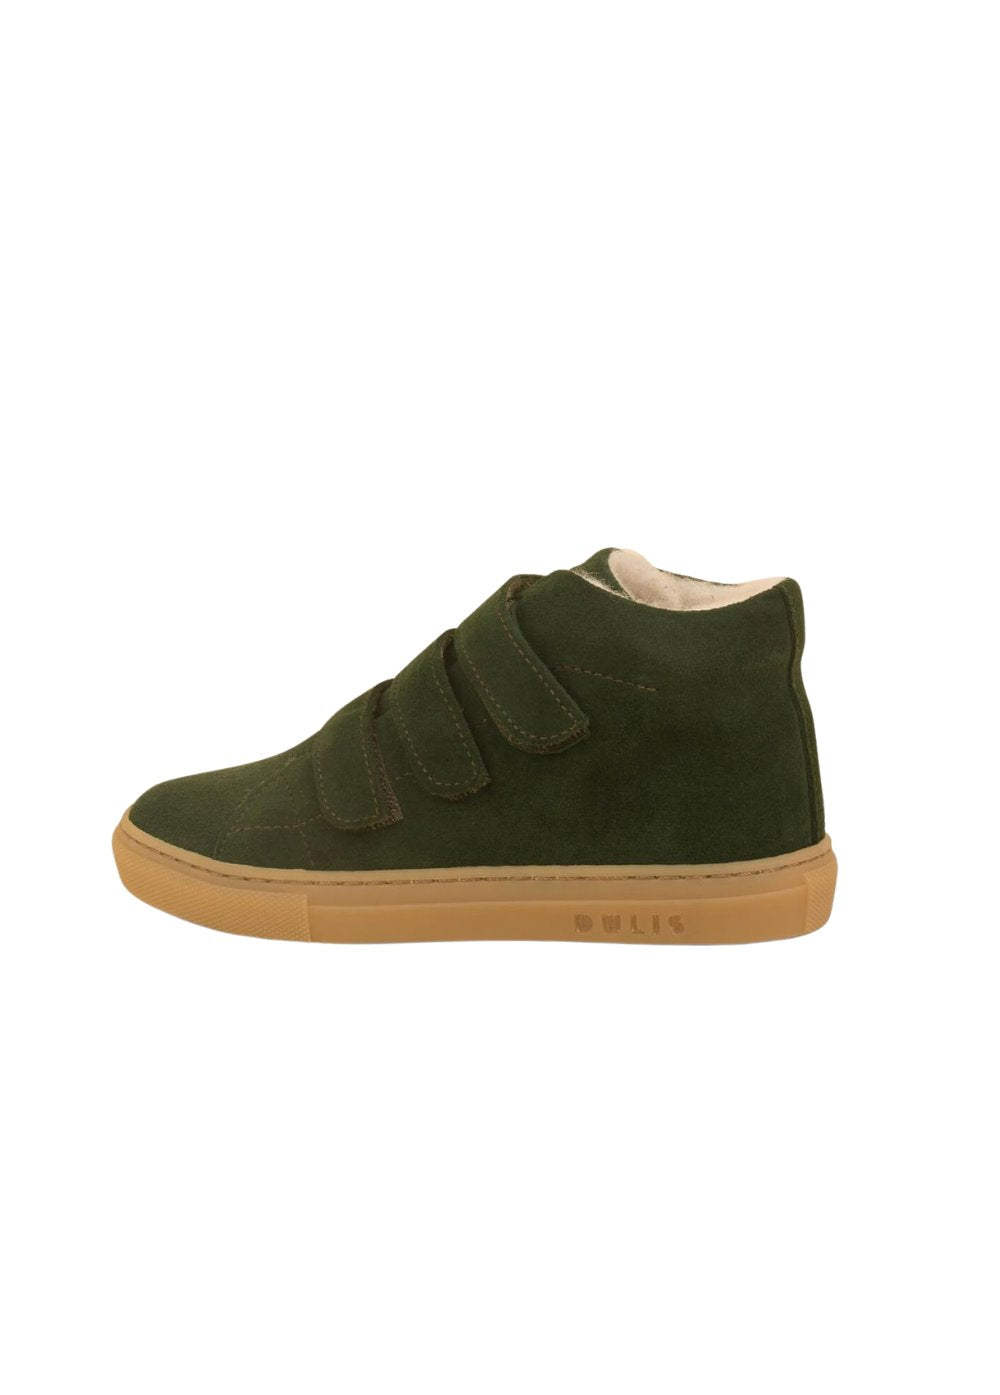 Green Velcro Mid Sneakers Shoes Dulis Shoes 